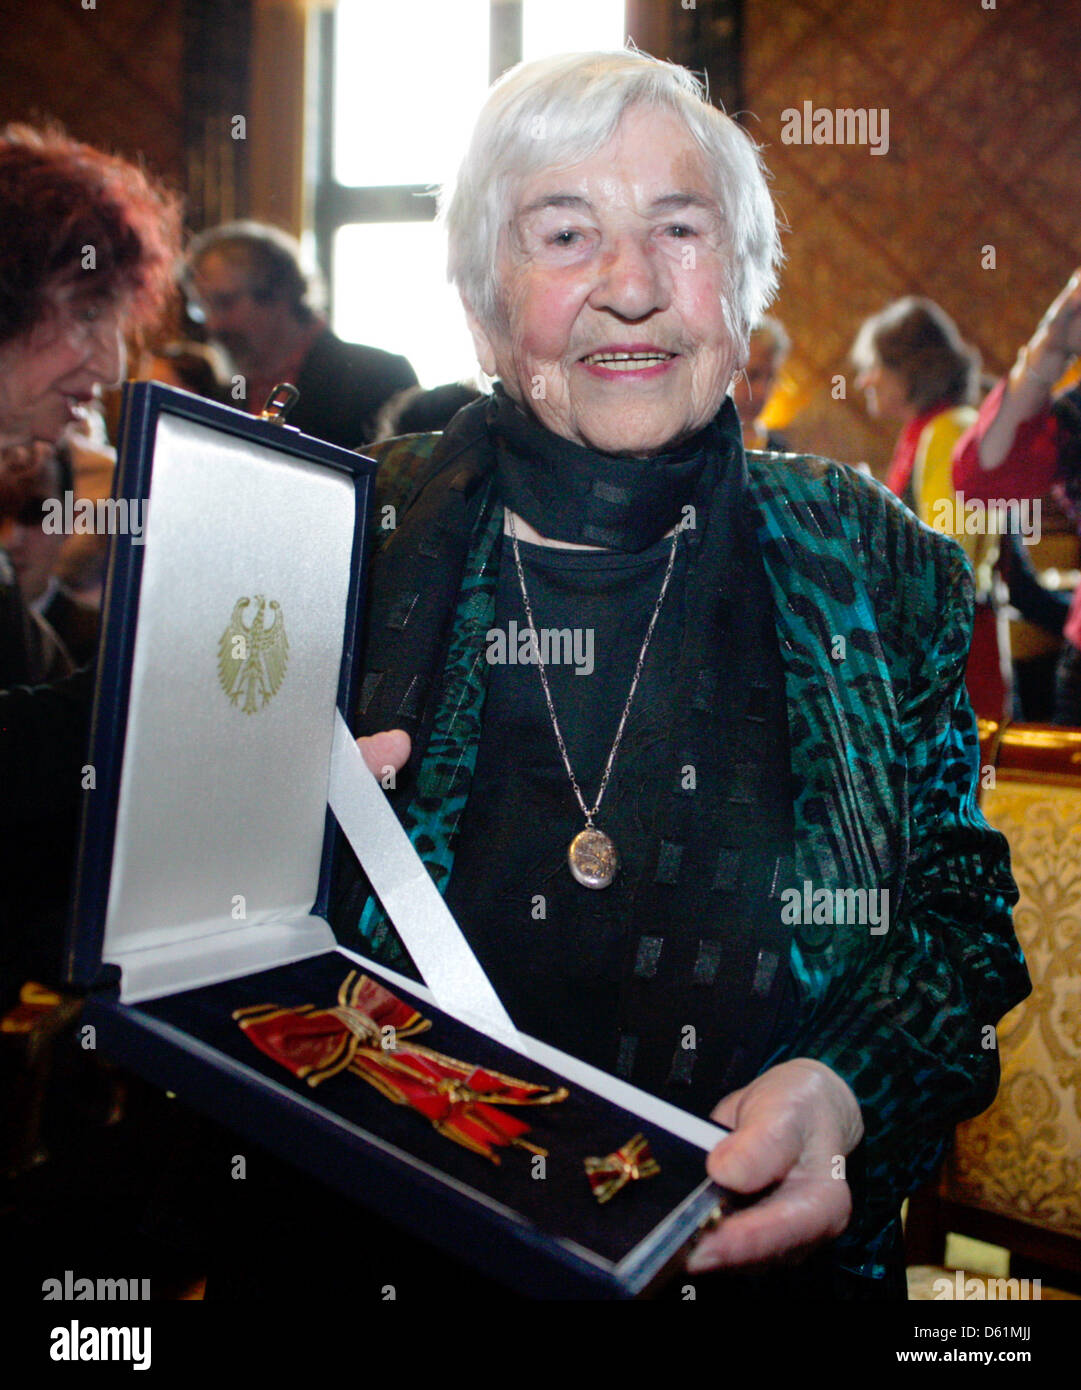 Esther Bejarano is pictured with her Great Federal Cross of Merit at the city hall in Hamburg, Germany, 26 April 2012. Mayor of Hamburg Olaf Scholz awarded her the Great Federal Cross of Merit. Bejarano is one of the last survivors of the girls' orchestra of Auschwitz. Photo: DANIEL BOCKWOLDT Stock Photo